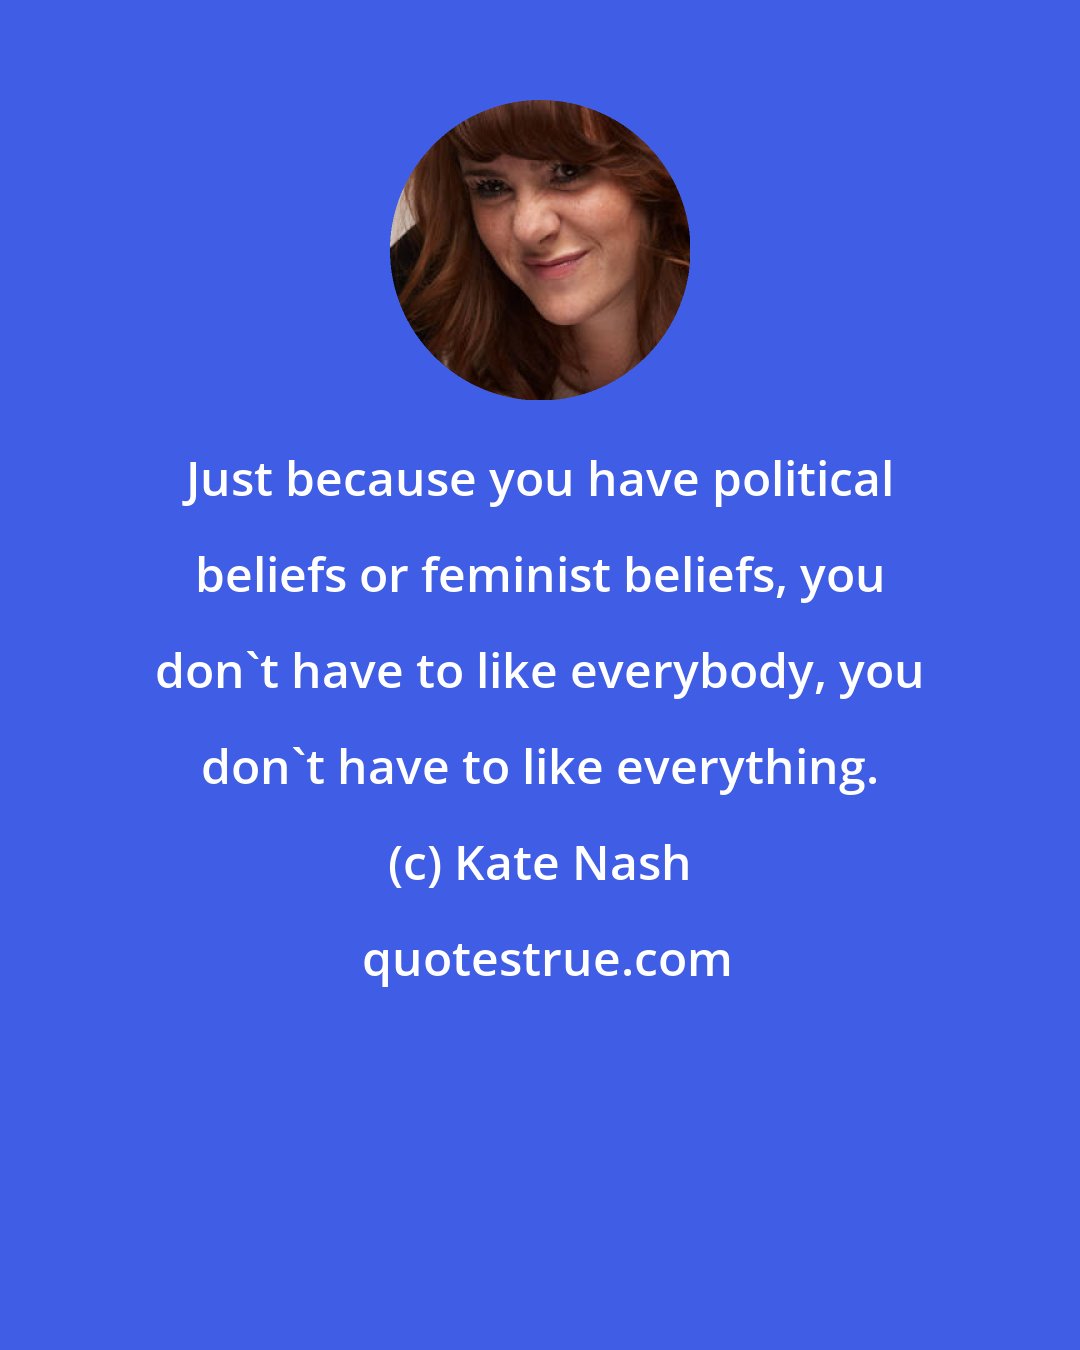 Kate Nash: Just because you have political beliefs or feminist beliefs, you don't have to like everybody, you don't have to like everything.